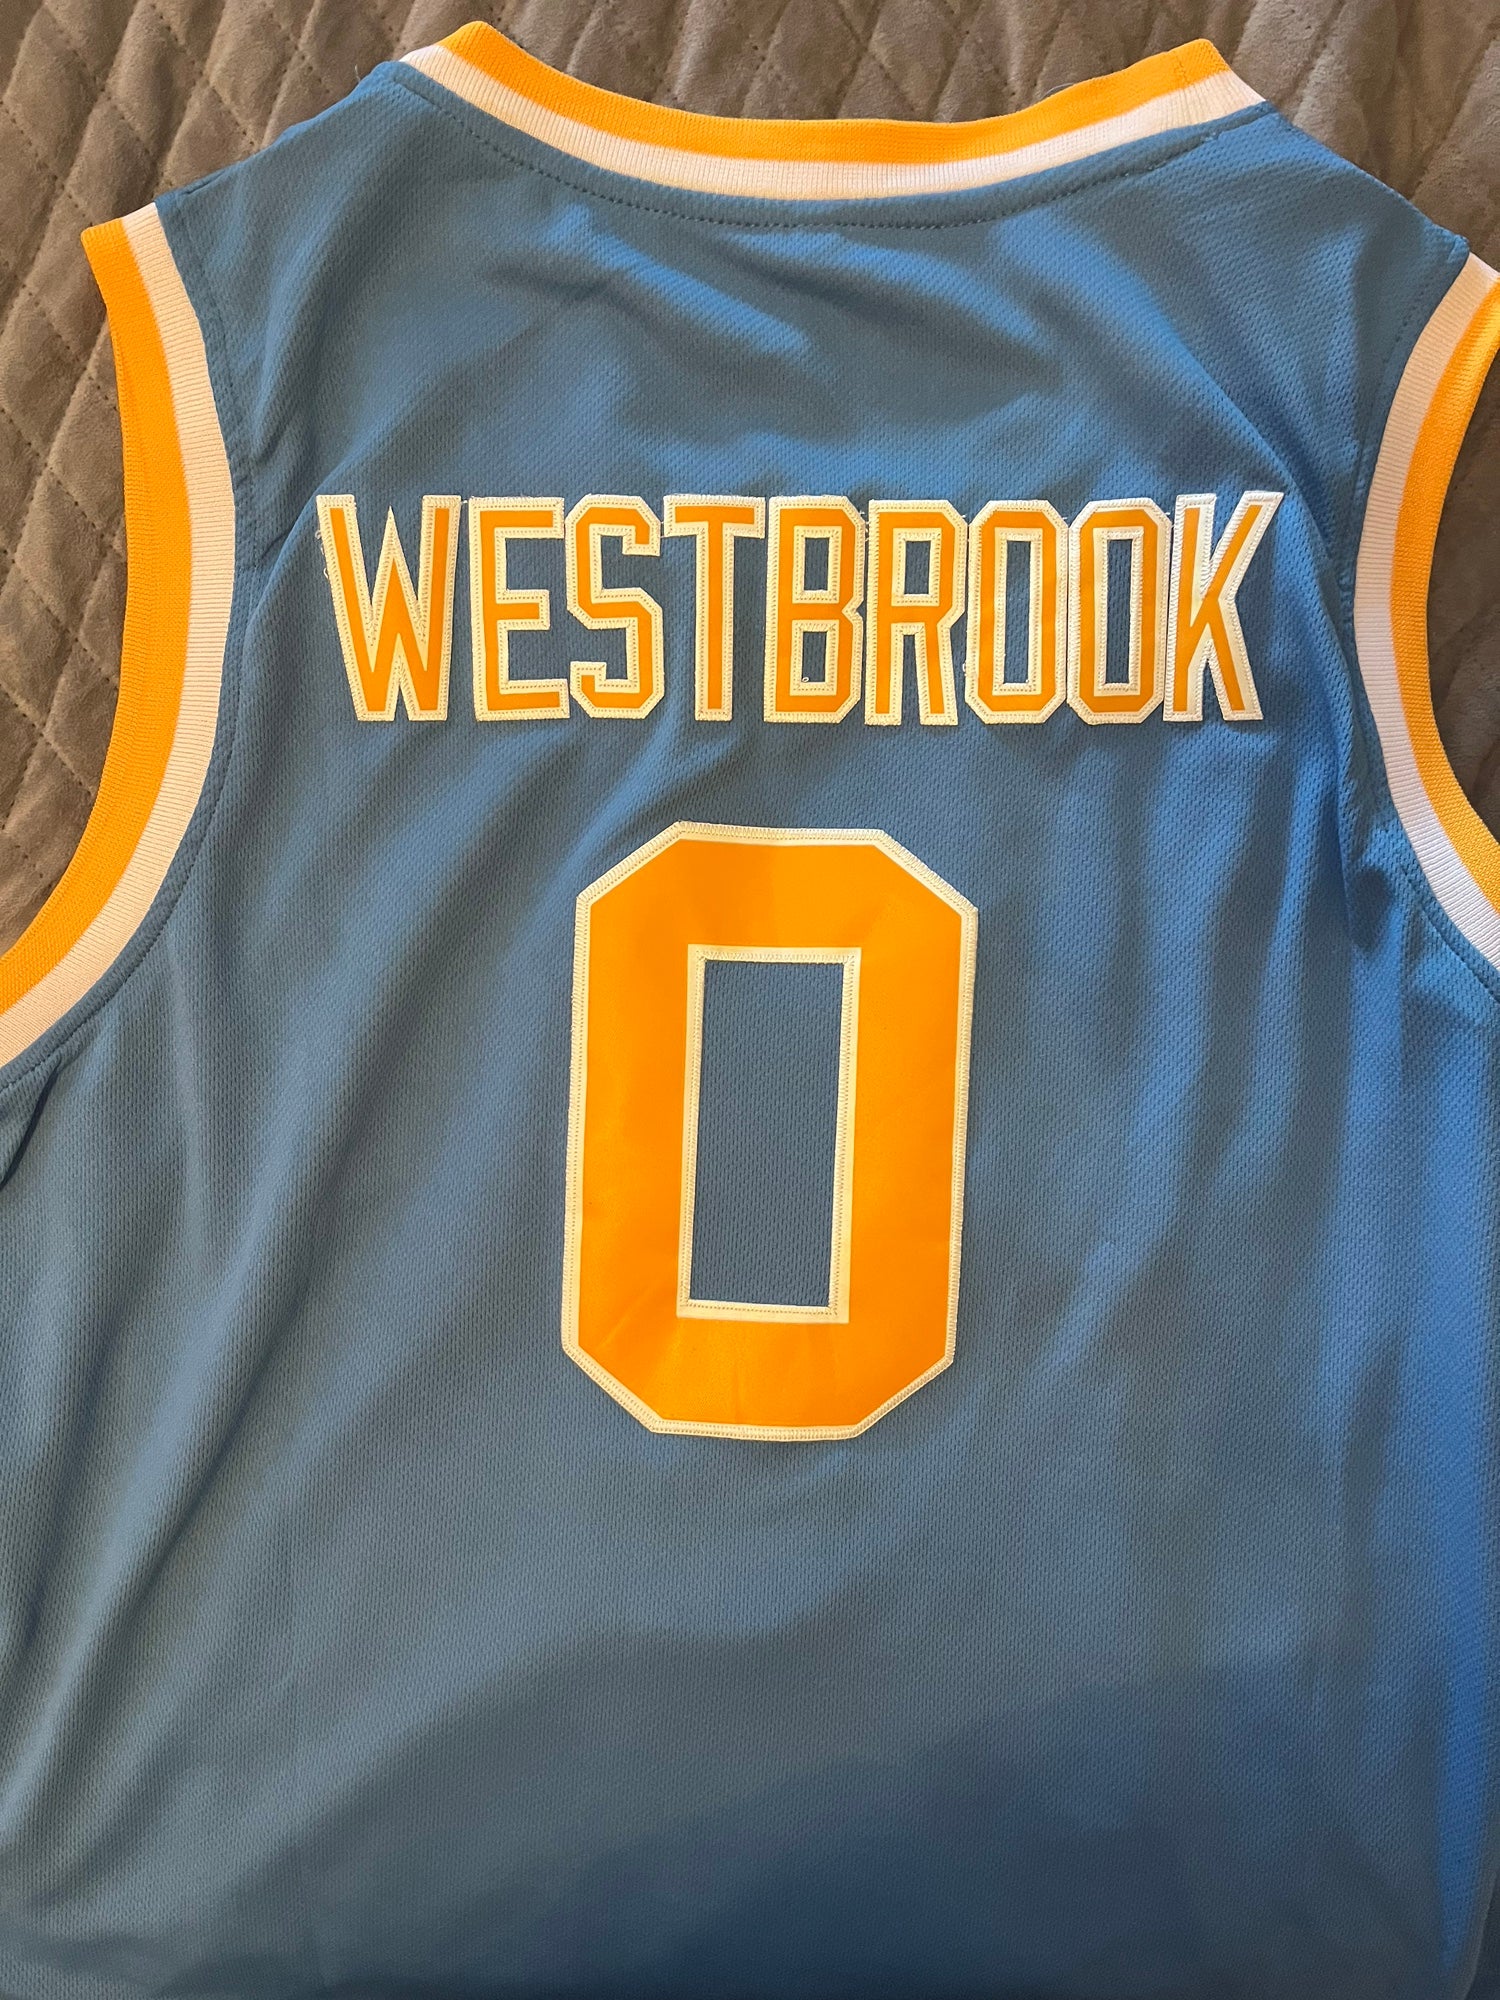 Russell Westbrook UCLA College Jersey  Basketball jersey outfit, Ucla  basketball, Ucla bruins